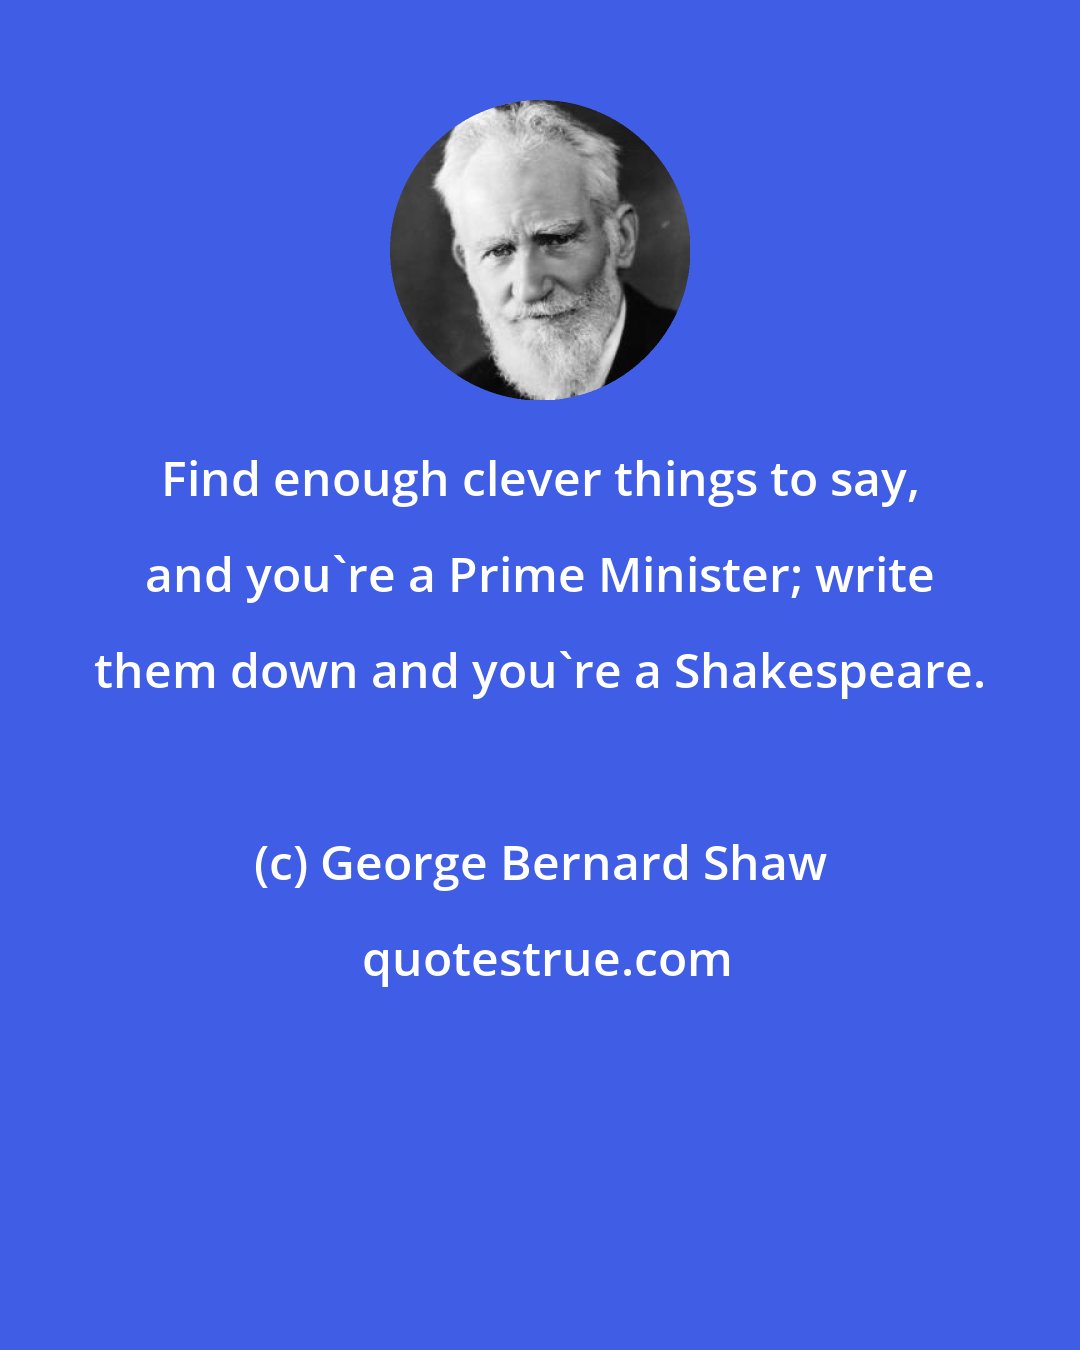 George Bernard Shaw: Find enough clever things to say, and you're a Prime Minister; write them down and you're a Shakespeare.